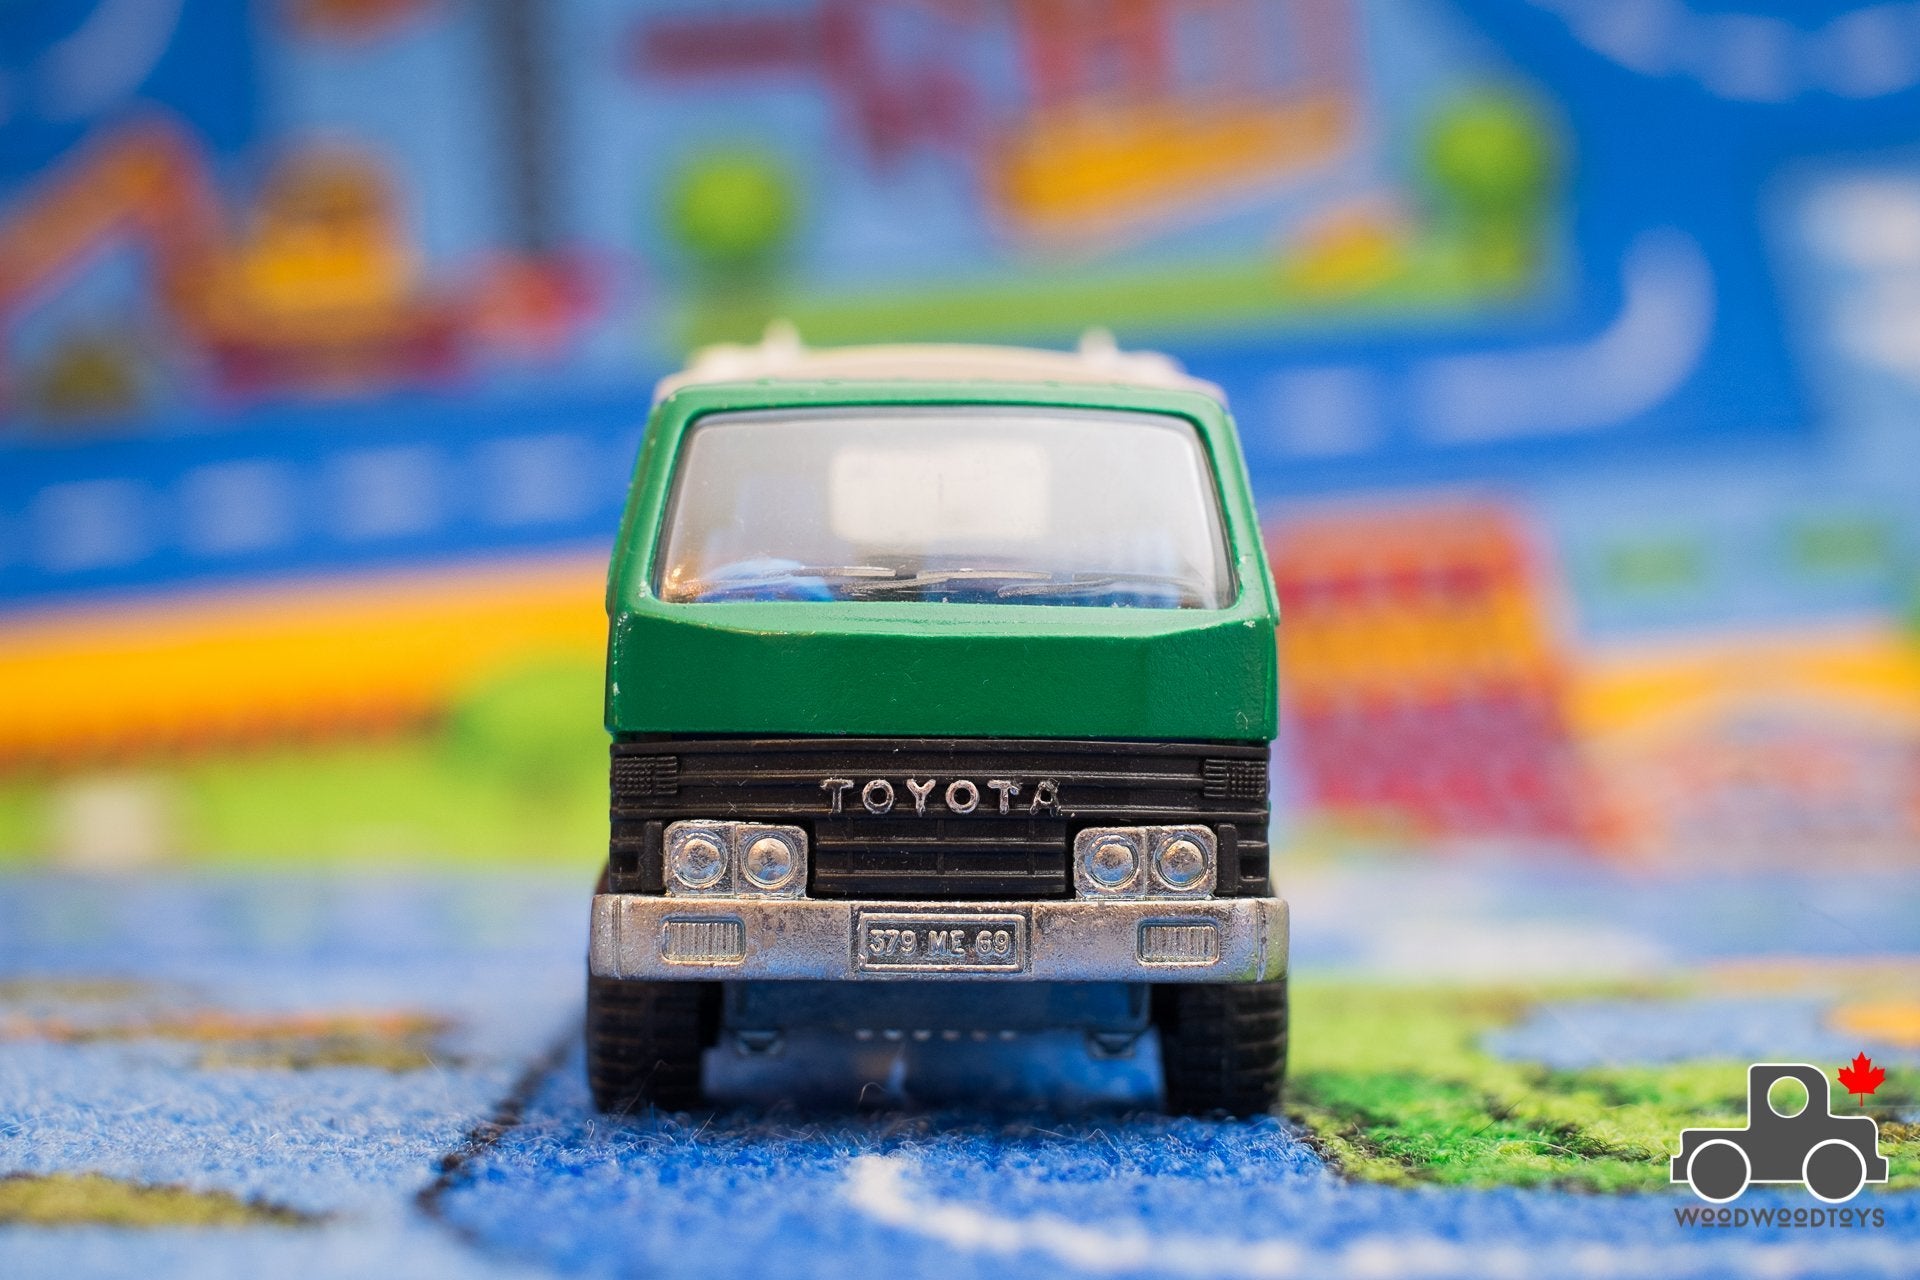 Vintage Majorette 1:35 "Hungry Hippo" Toyota Garbage Truck - Wood Wood Toys Canada's Favourite Montessori Toy Store